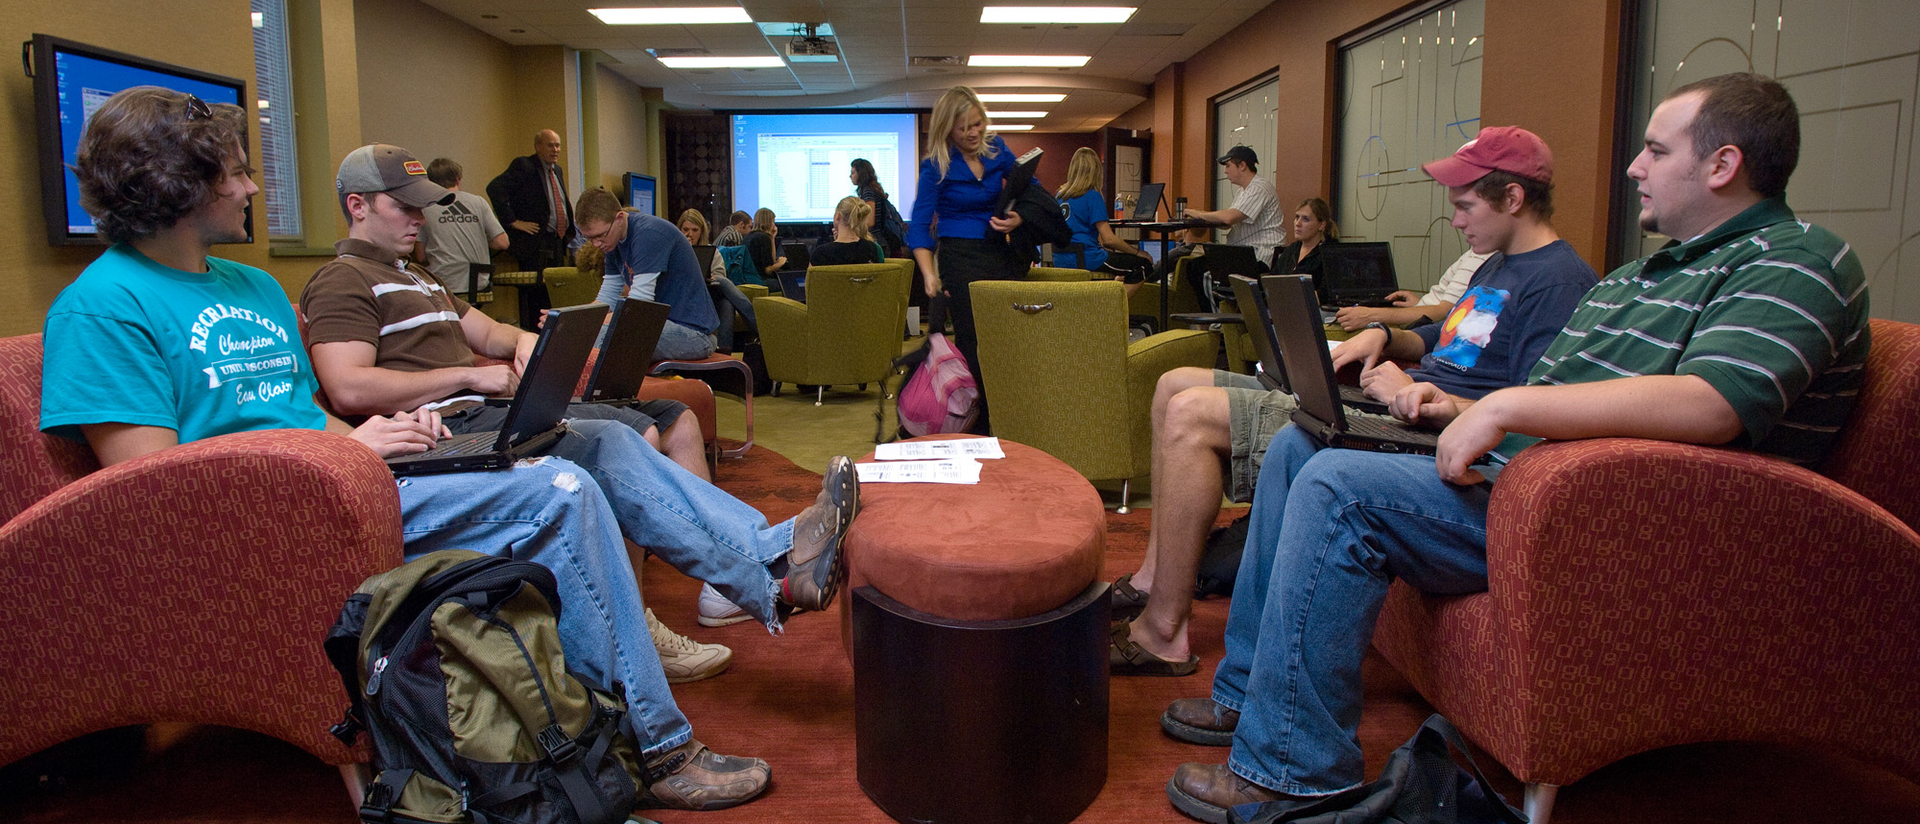 Students in Interactive classroom